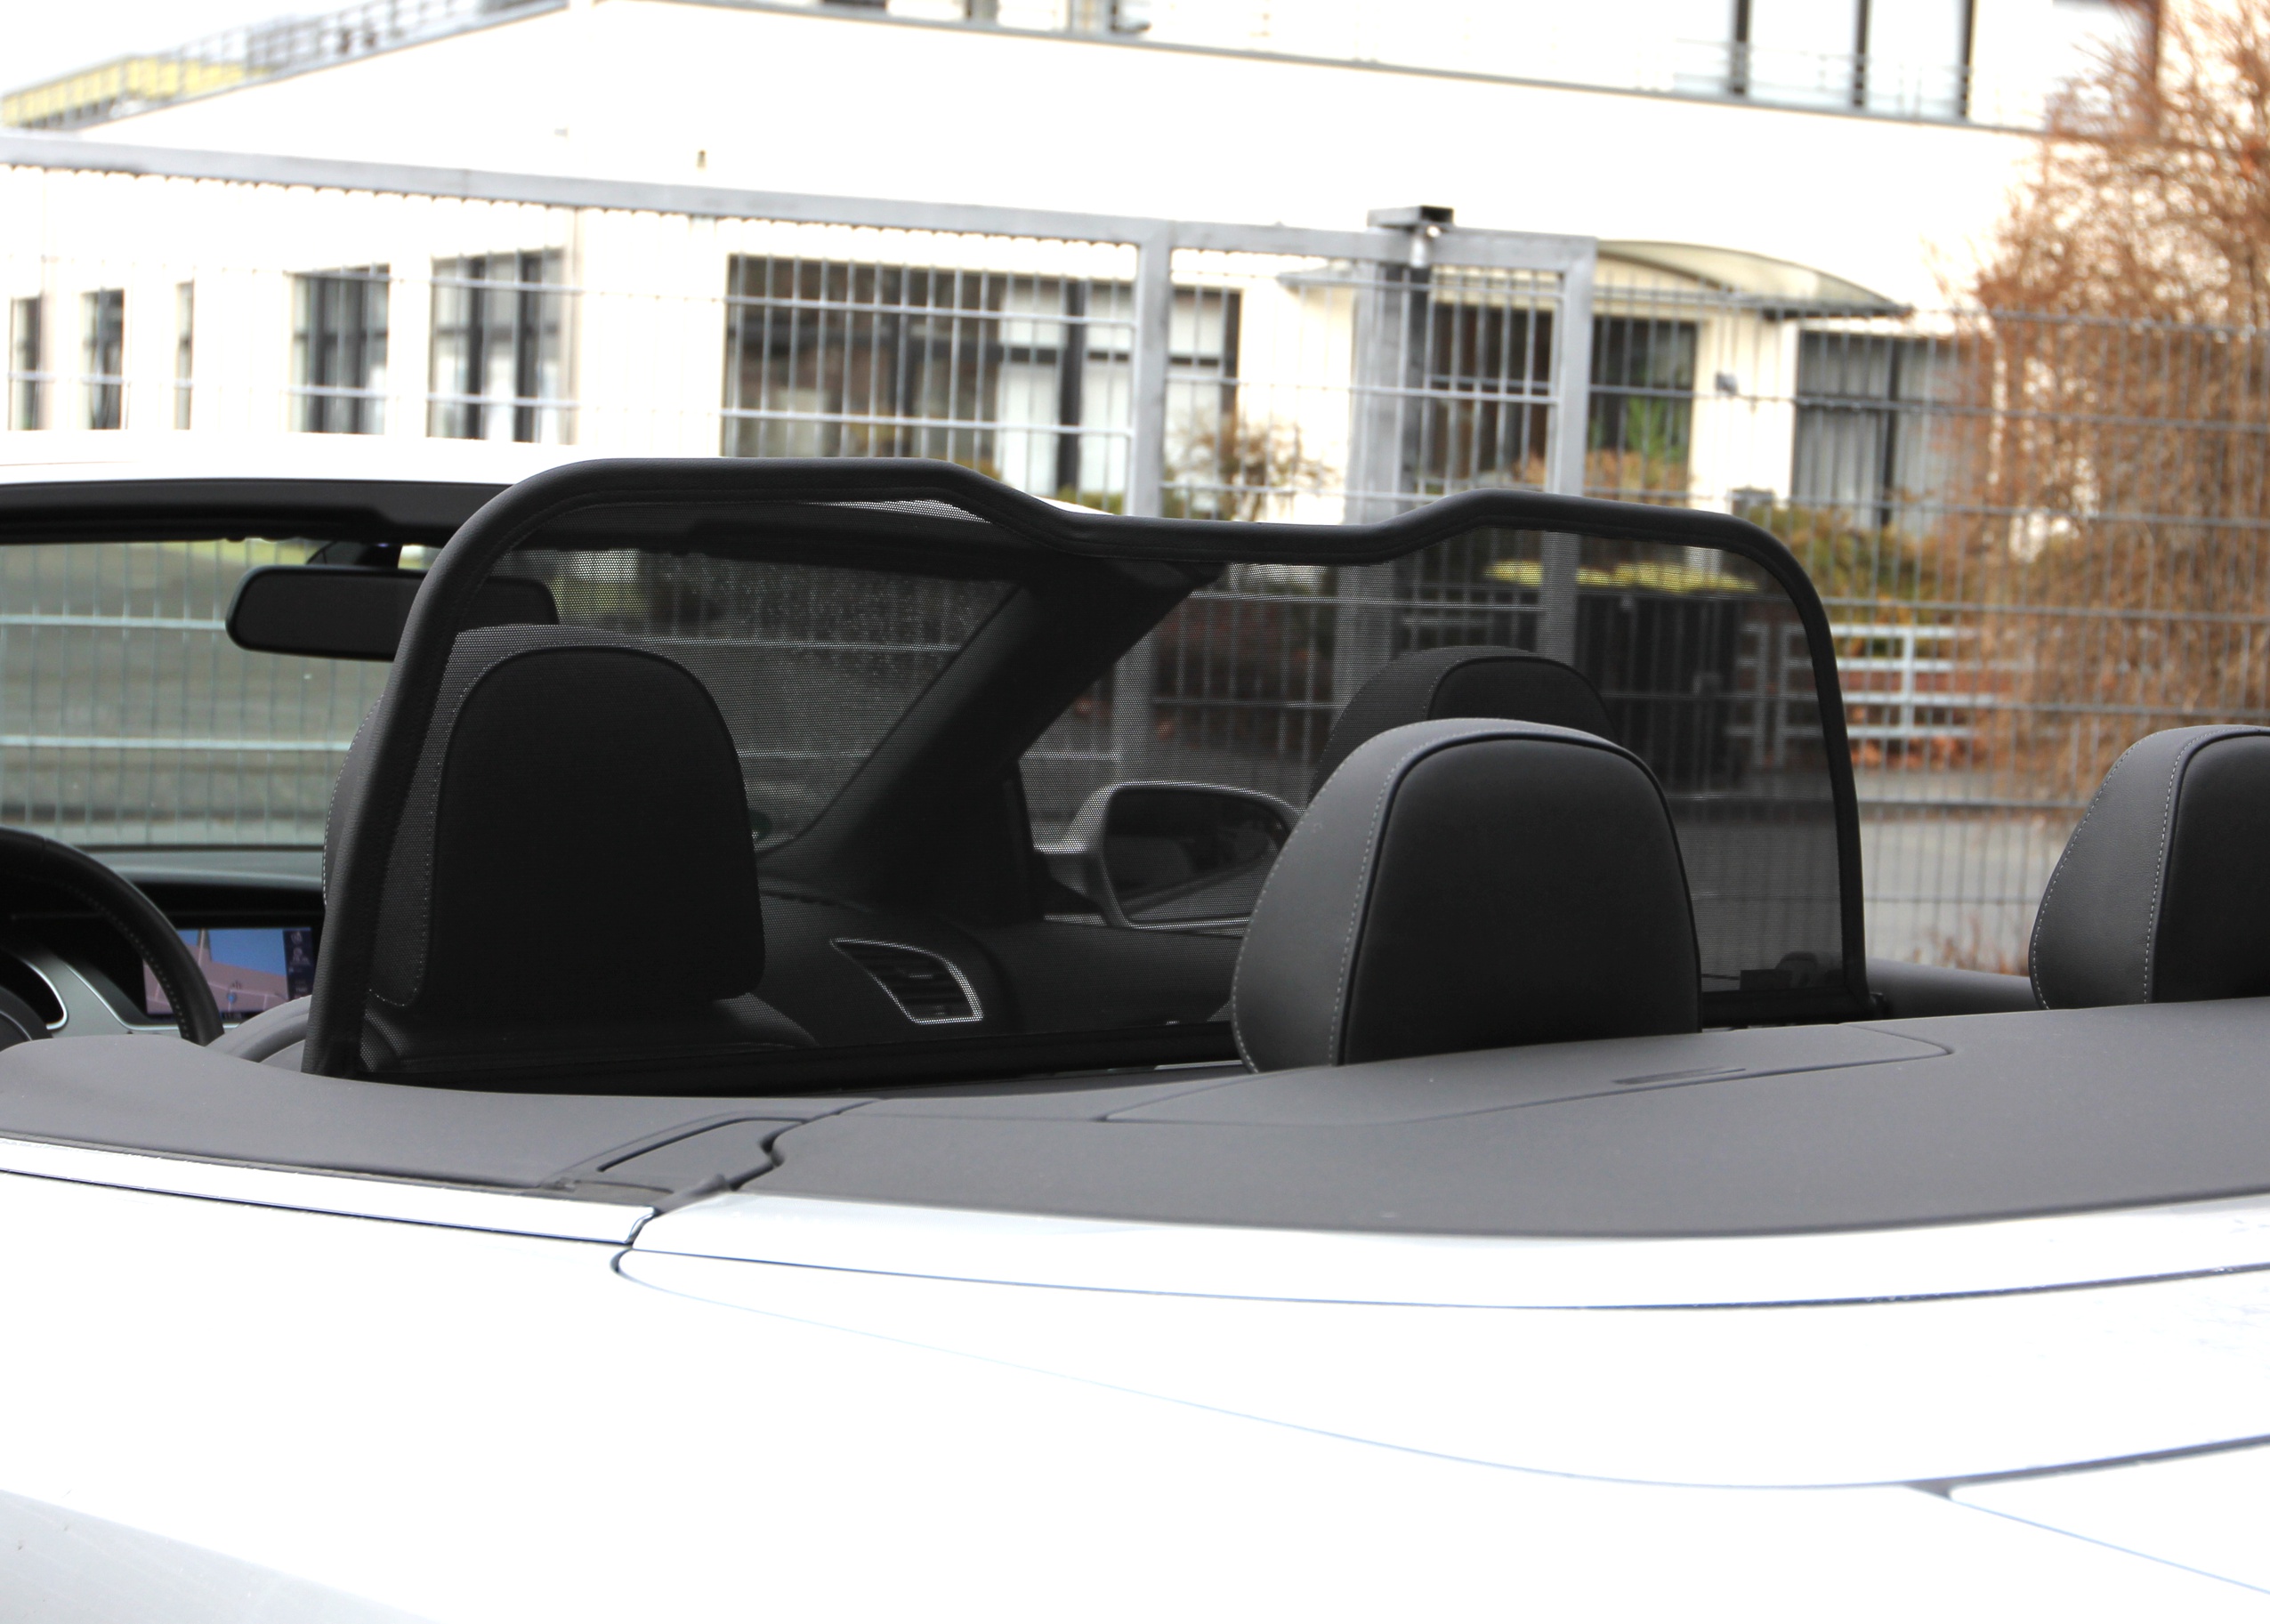 Airax wind deflector suitable for Audi A5 Typ 8F  